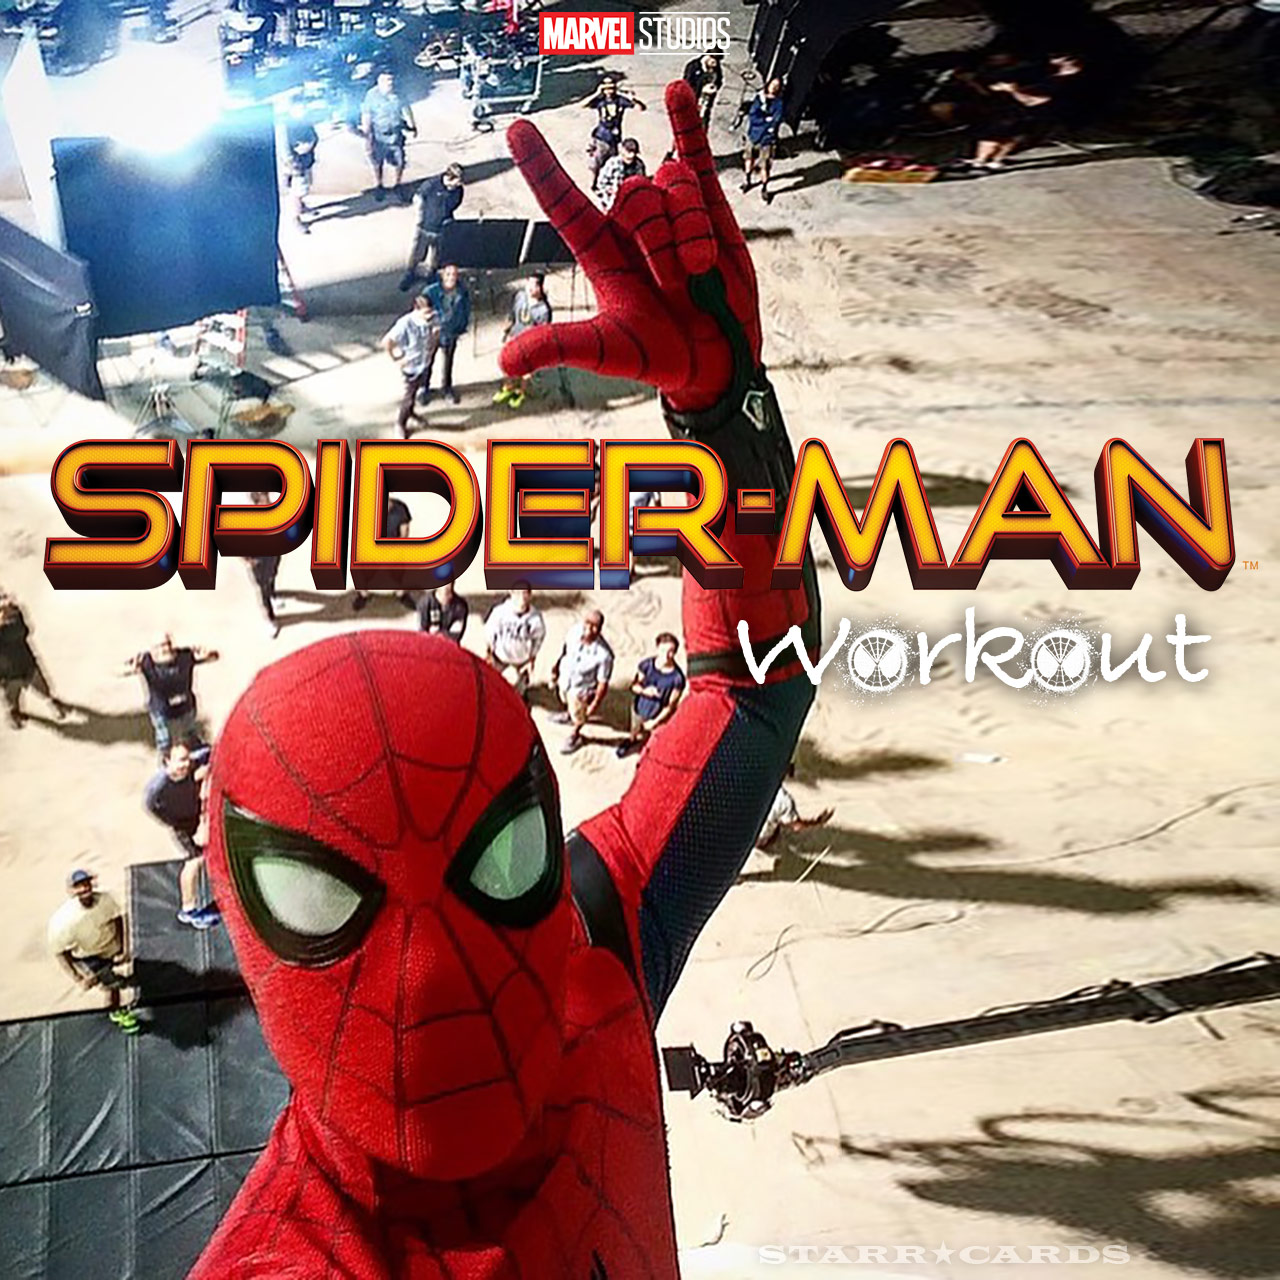 Workout with Spider-Man (Circuit Training) 